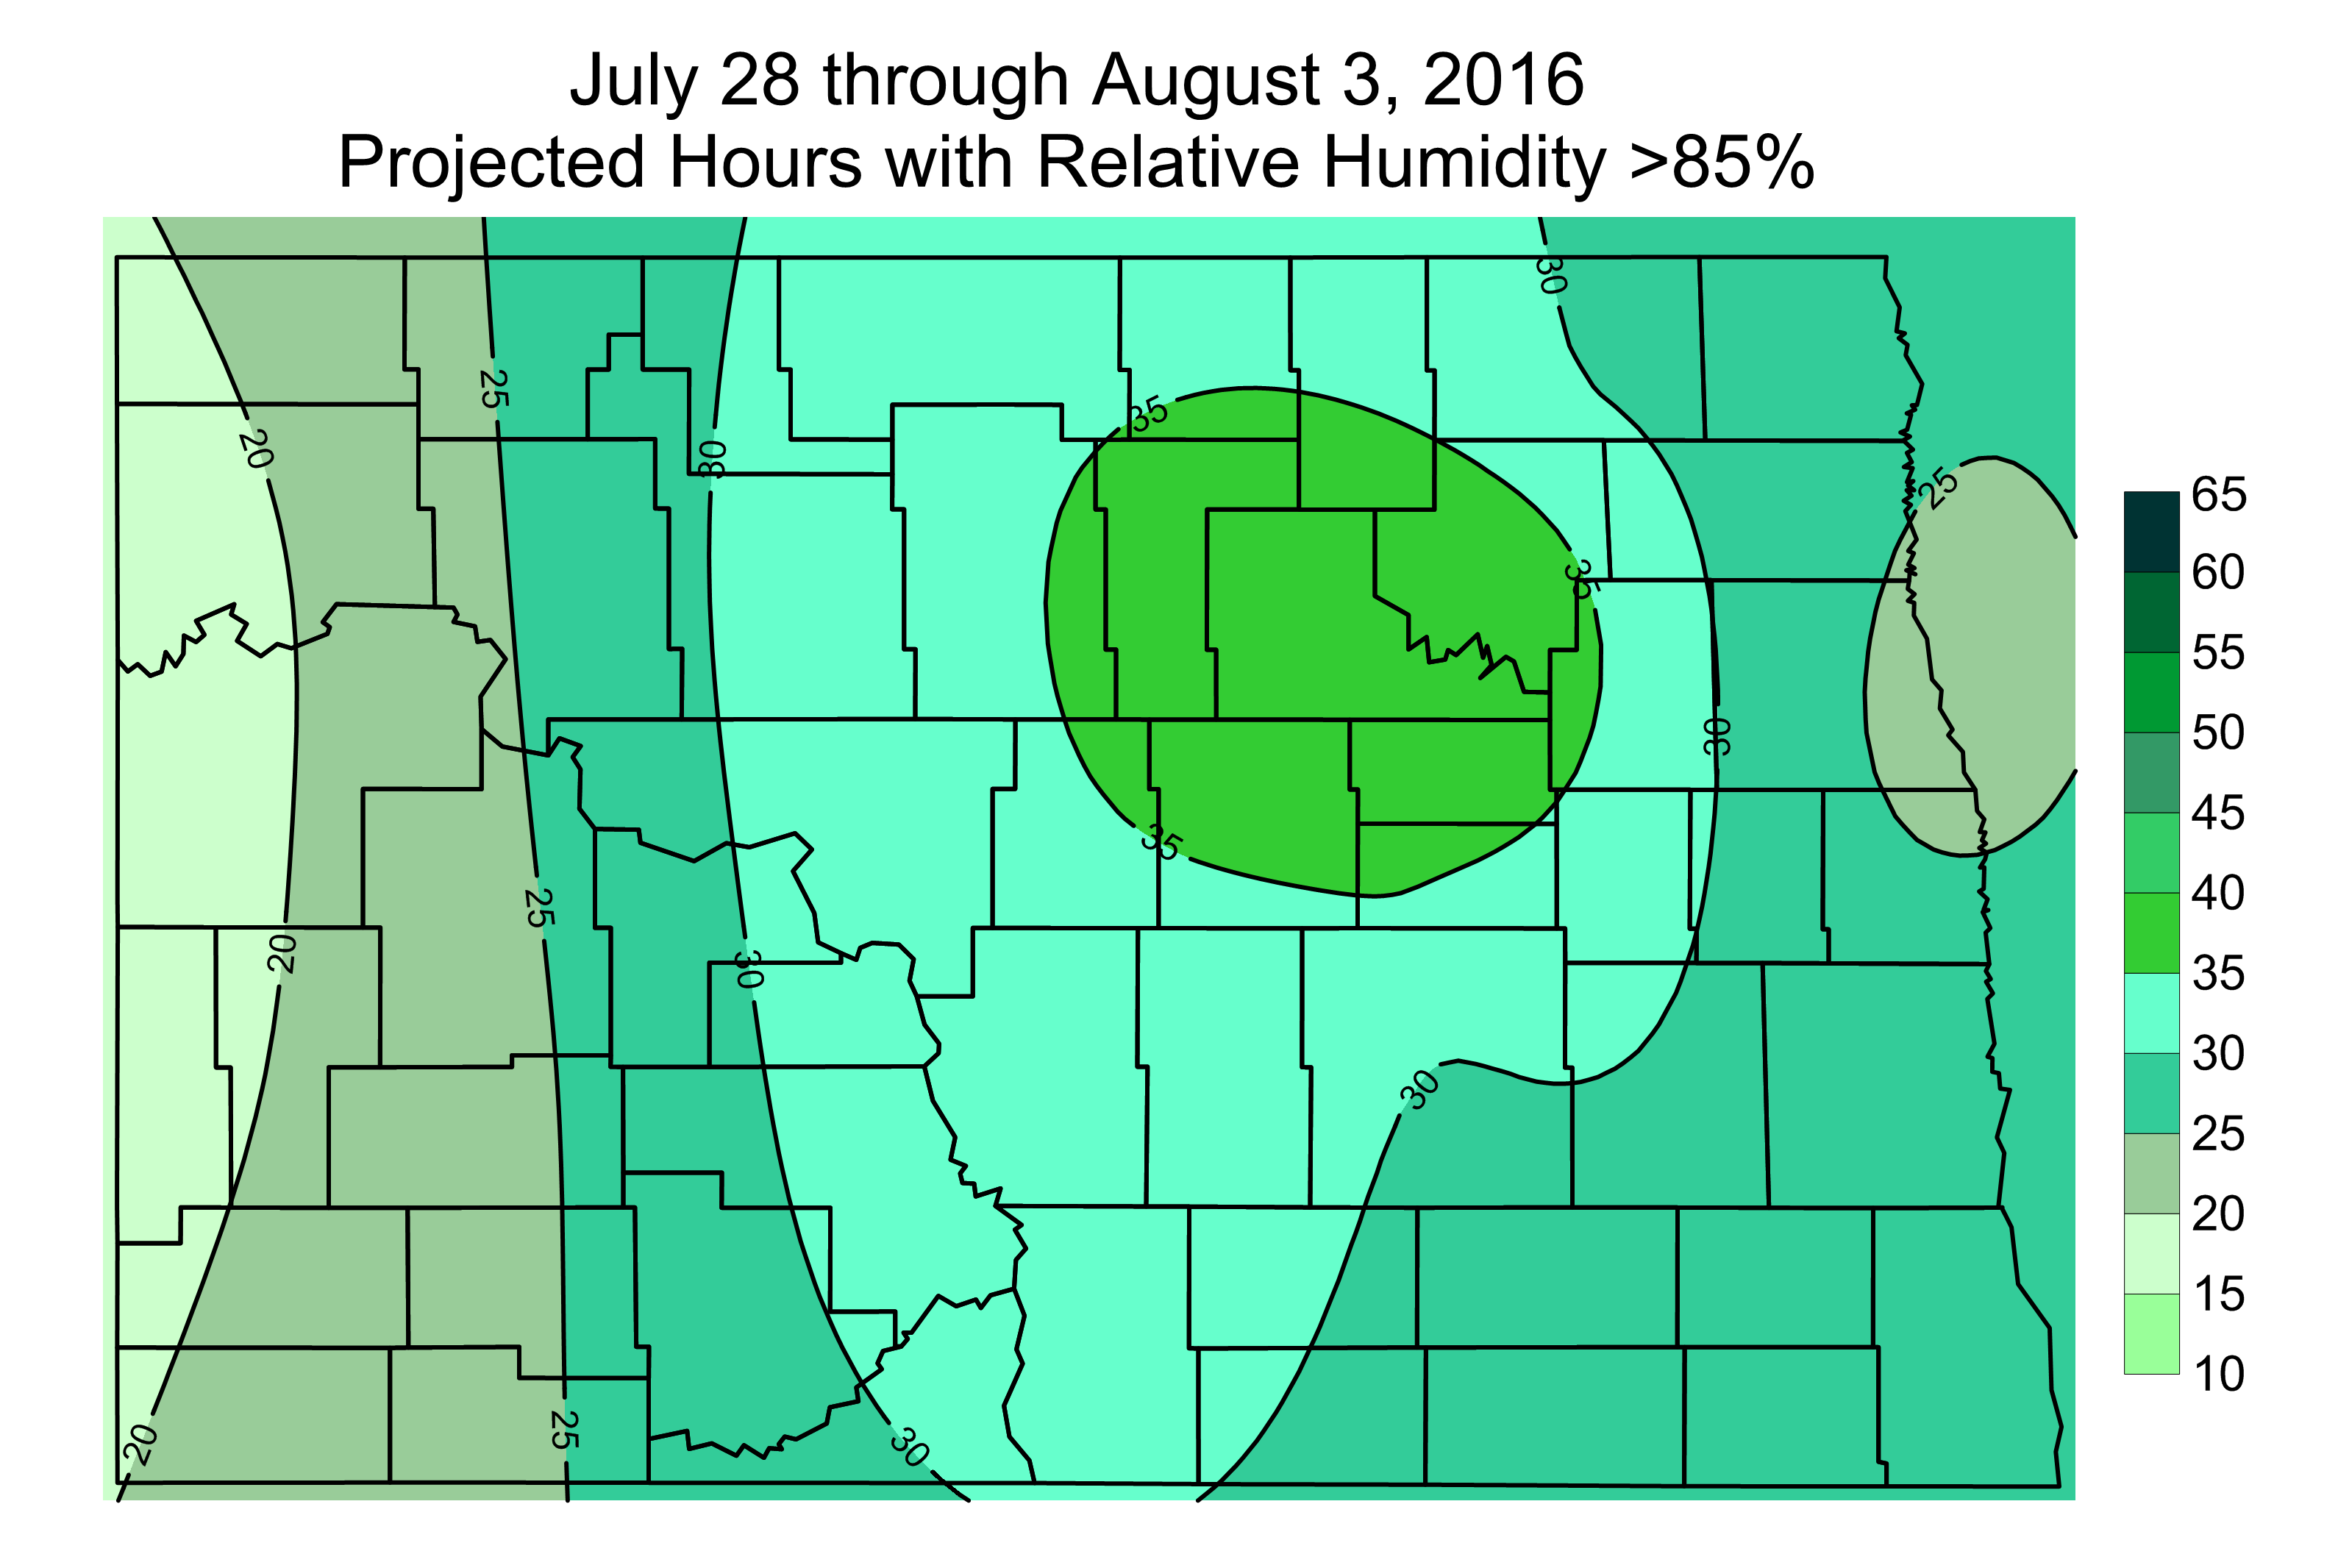 Projected Hours with Relative Humidity above 85% from July 28 through August 3, 2016